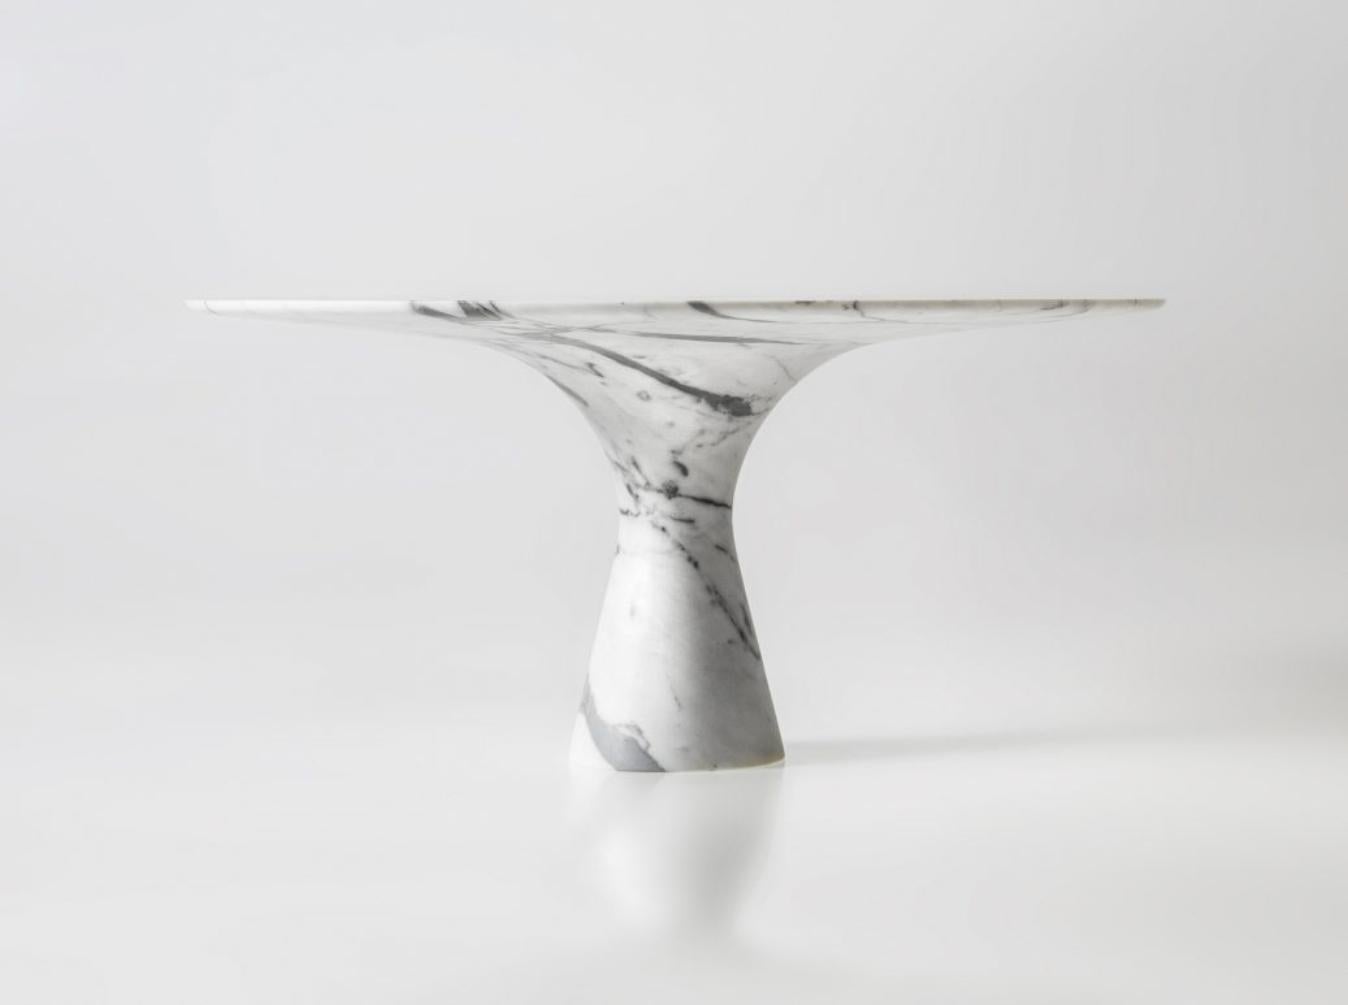 Bianco Statuarietto refined contemporary marble dining table 250/75
Dimensions: 250 x 160 x 75 cm
Materials: Bianco Statuarietto marble.

Angelo is the essence of a round table in natural stone, a sculptural shape in robust material with elegant